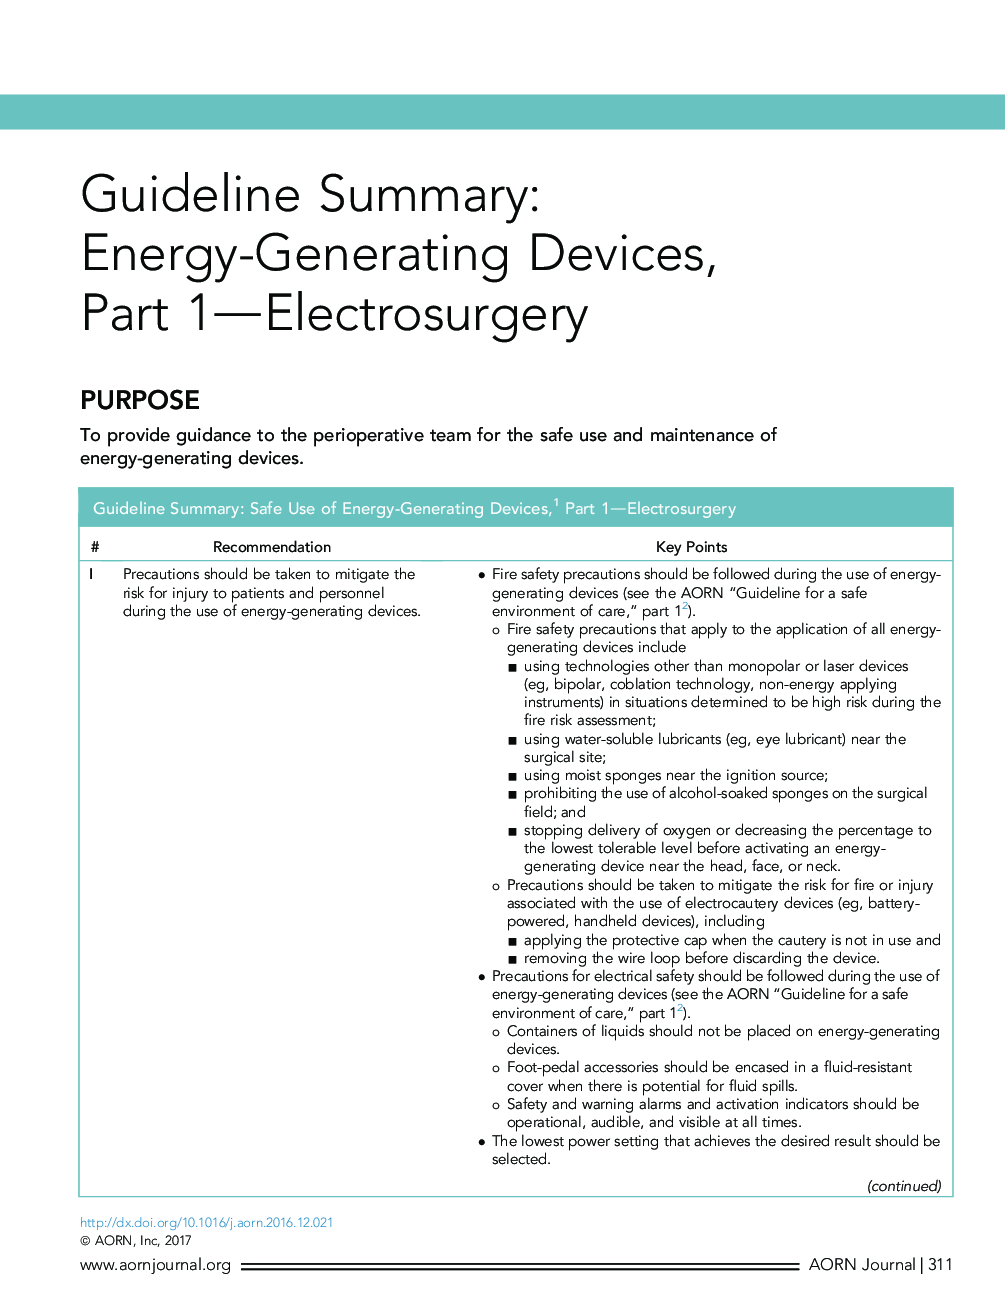 Guideline Summary: Energy-Generating Devices, PartÂ 1-Electrosurgery